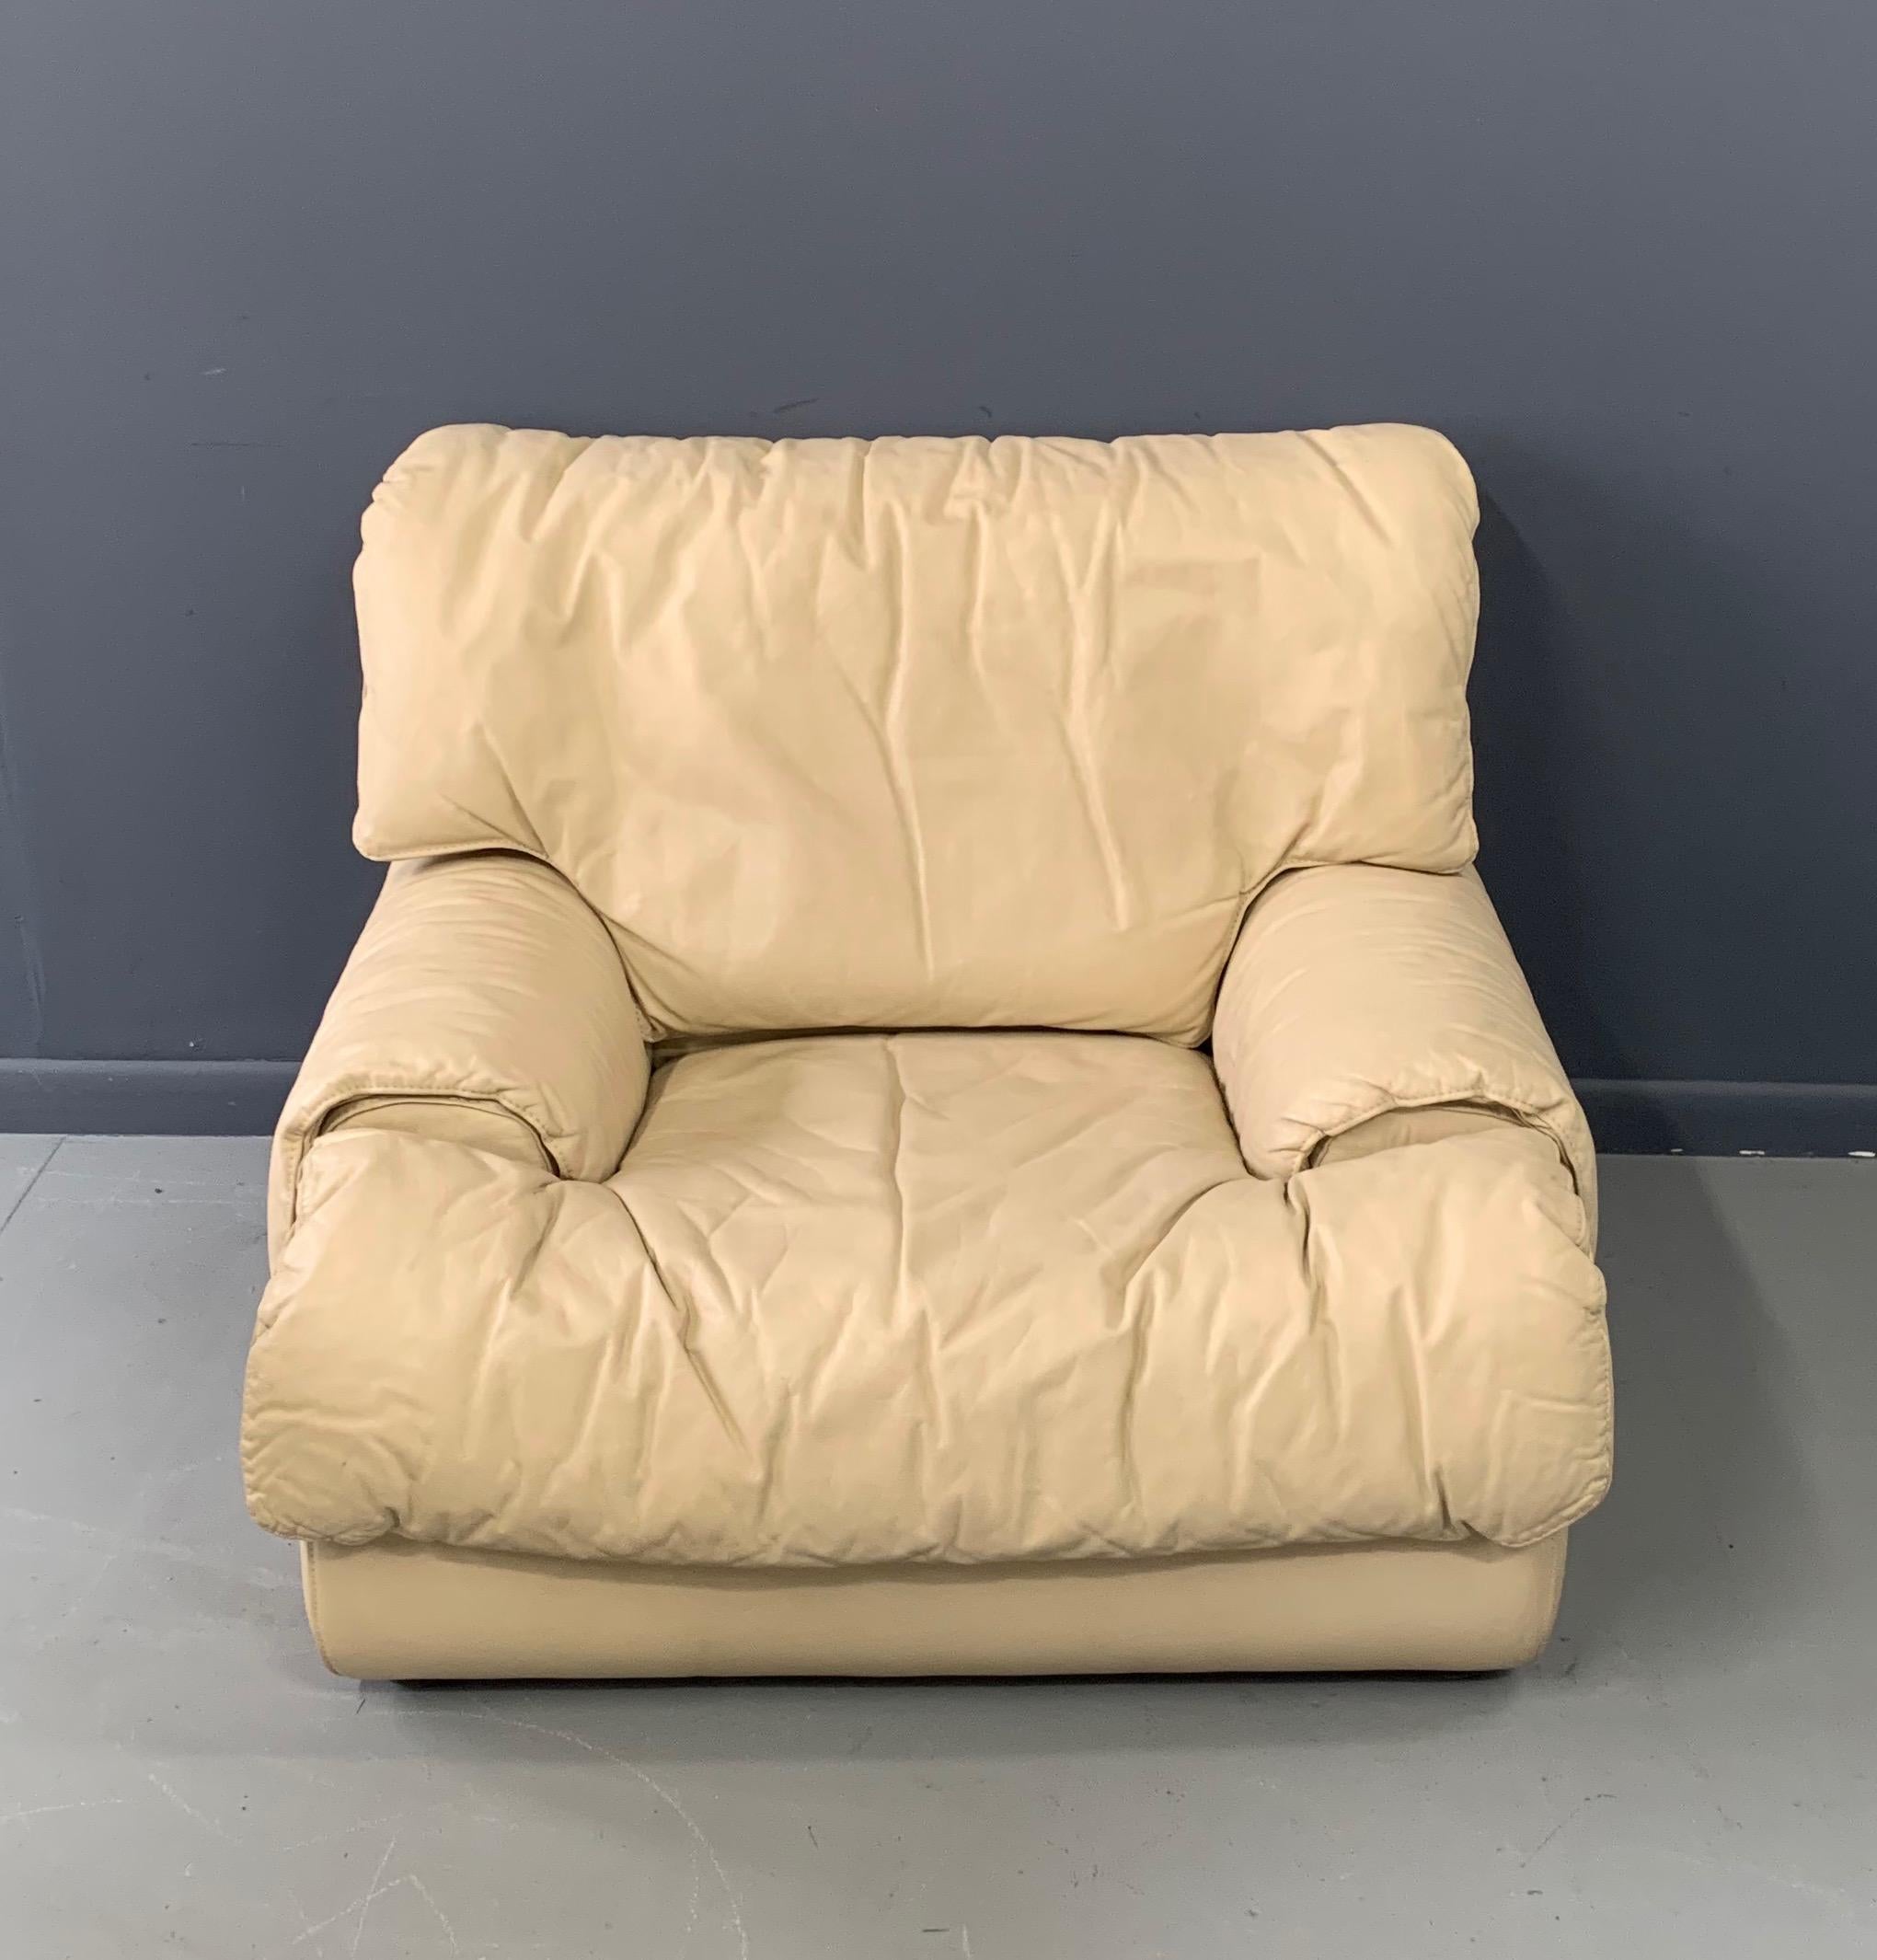 This oversized lounge chair by Roche Bobois created in the 1980s is upholstered in luxuriously soft leather that is in beautiful condition.